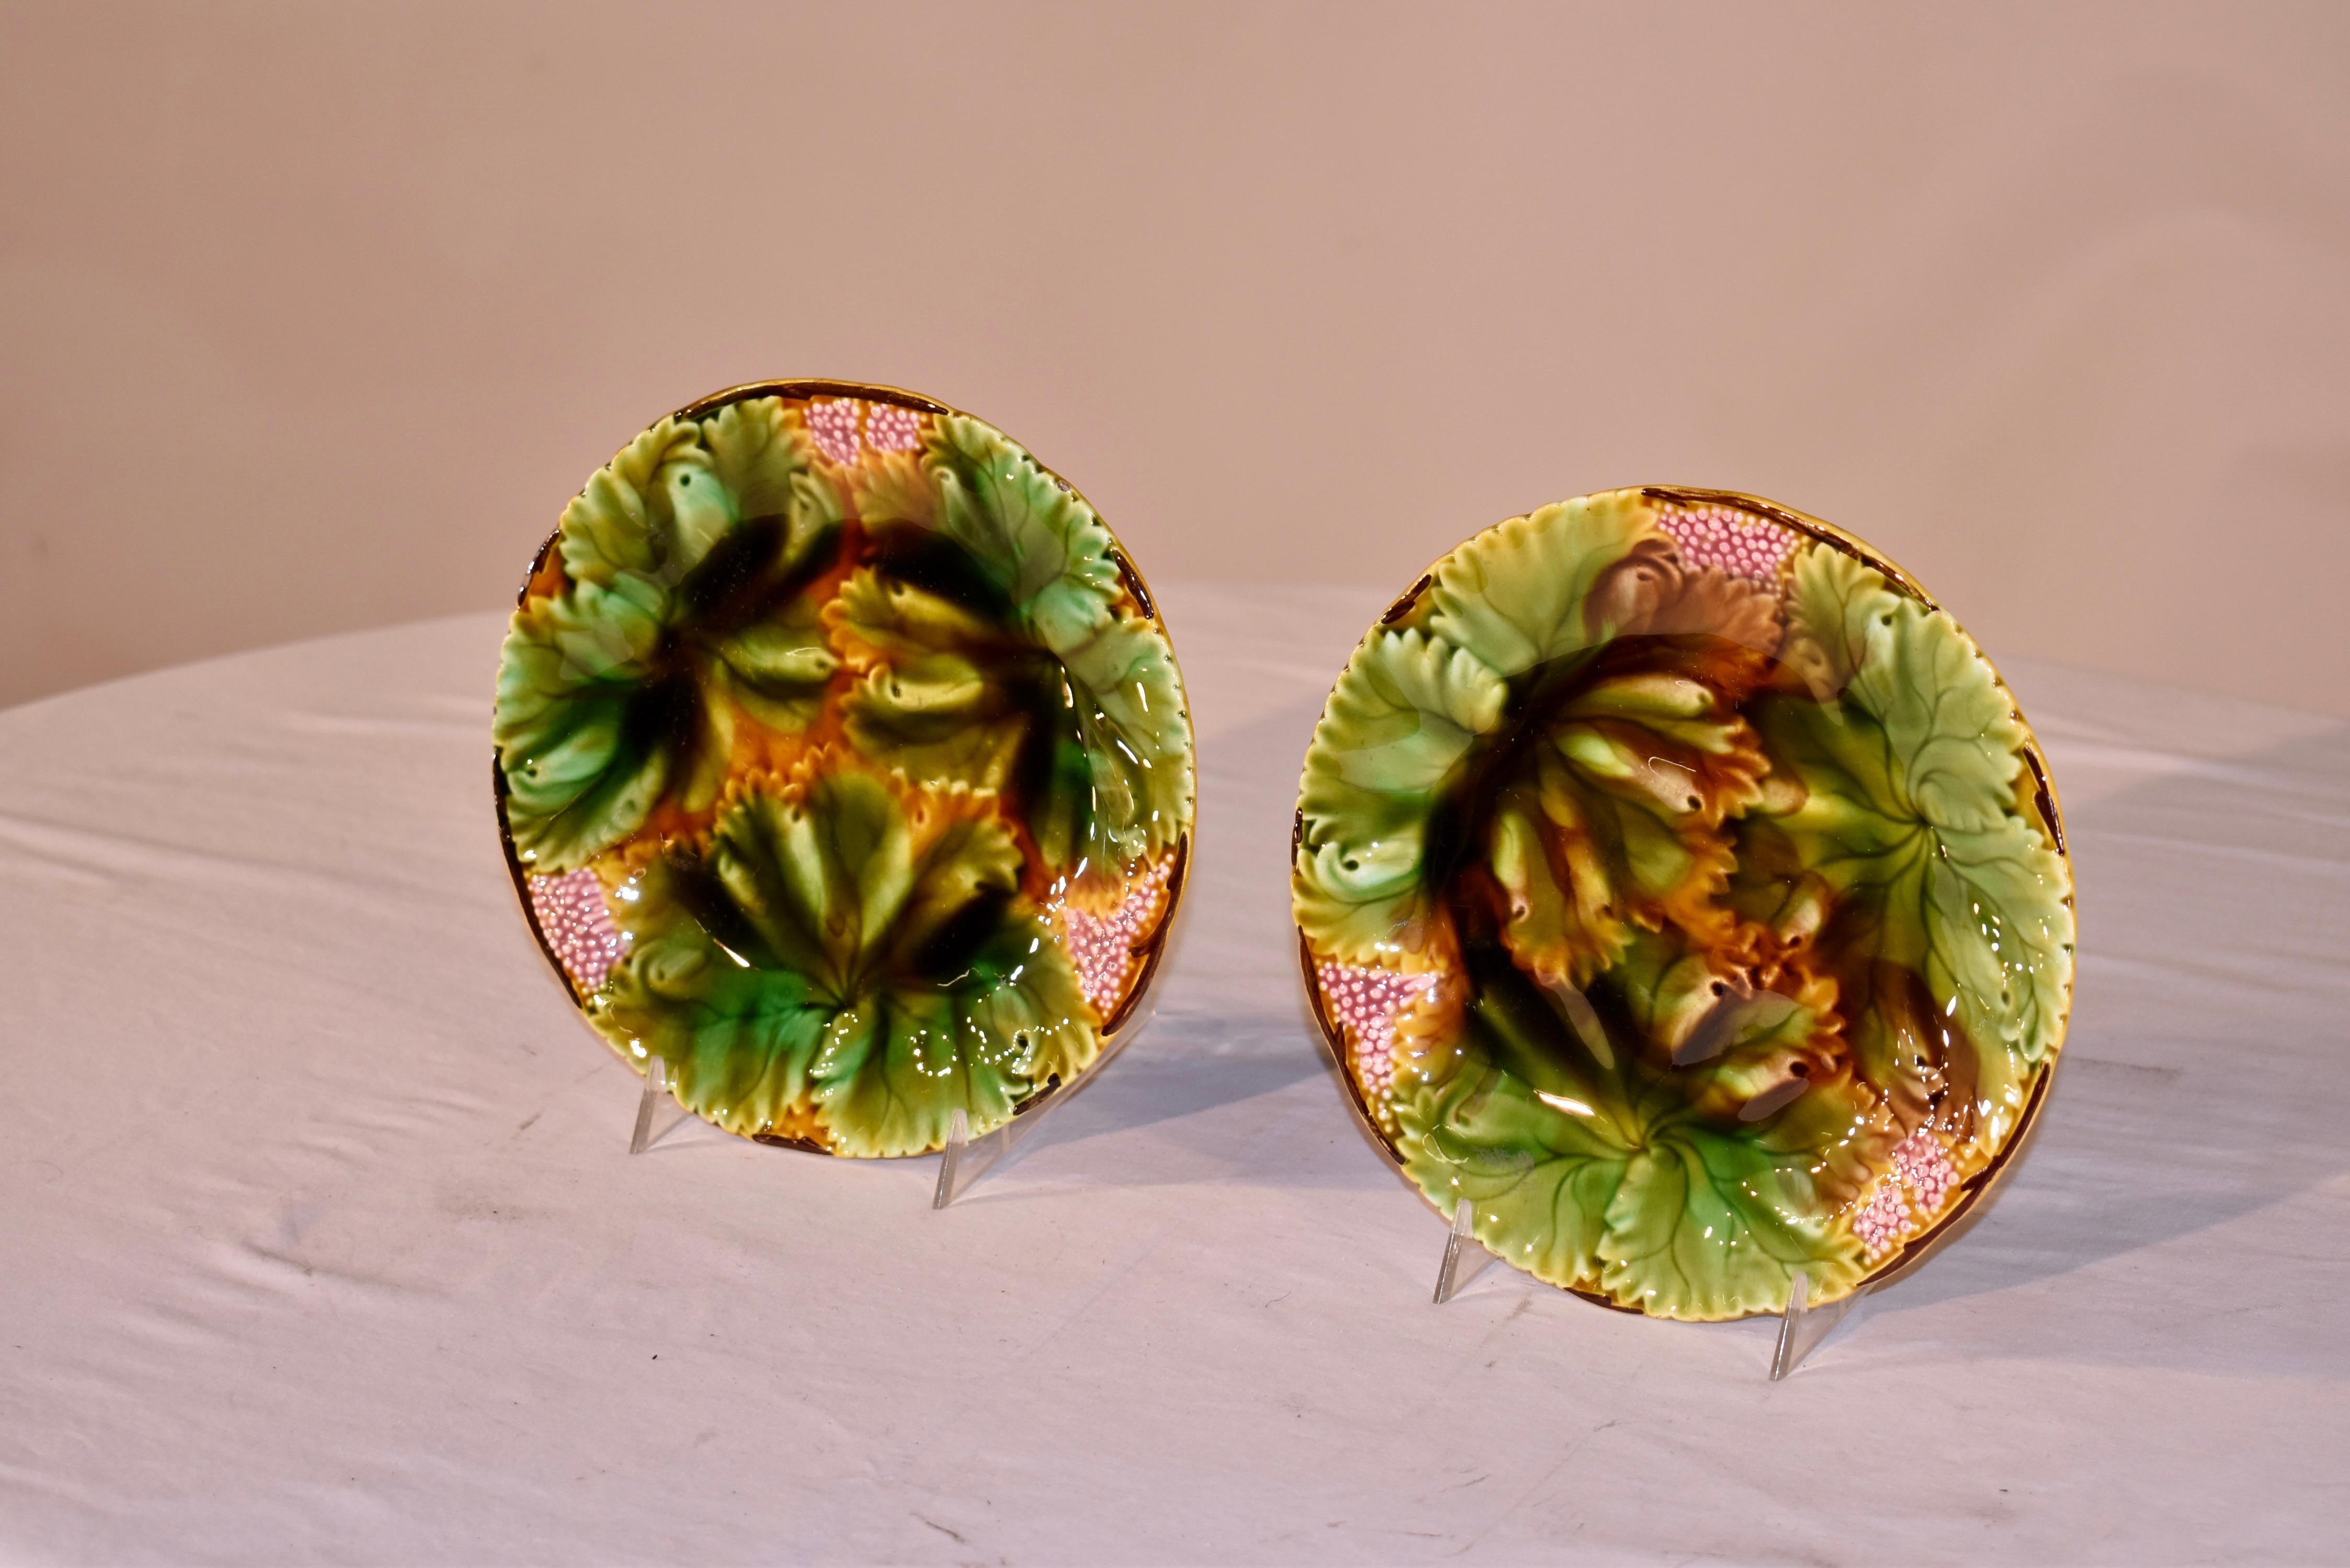 Pair of lovely late 19th century majolica plates, with manufacturer's marks on the reverse. The plates are in lovely colors of brown, green, gold and pink. There are three prominent leaves overlapped in this pattern, with sprays of berries in